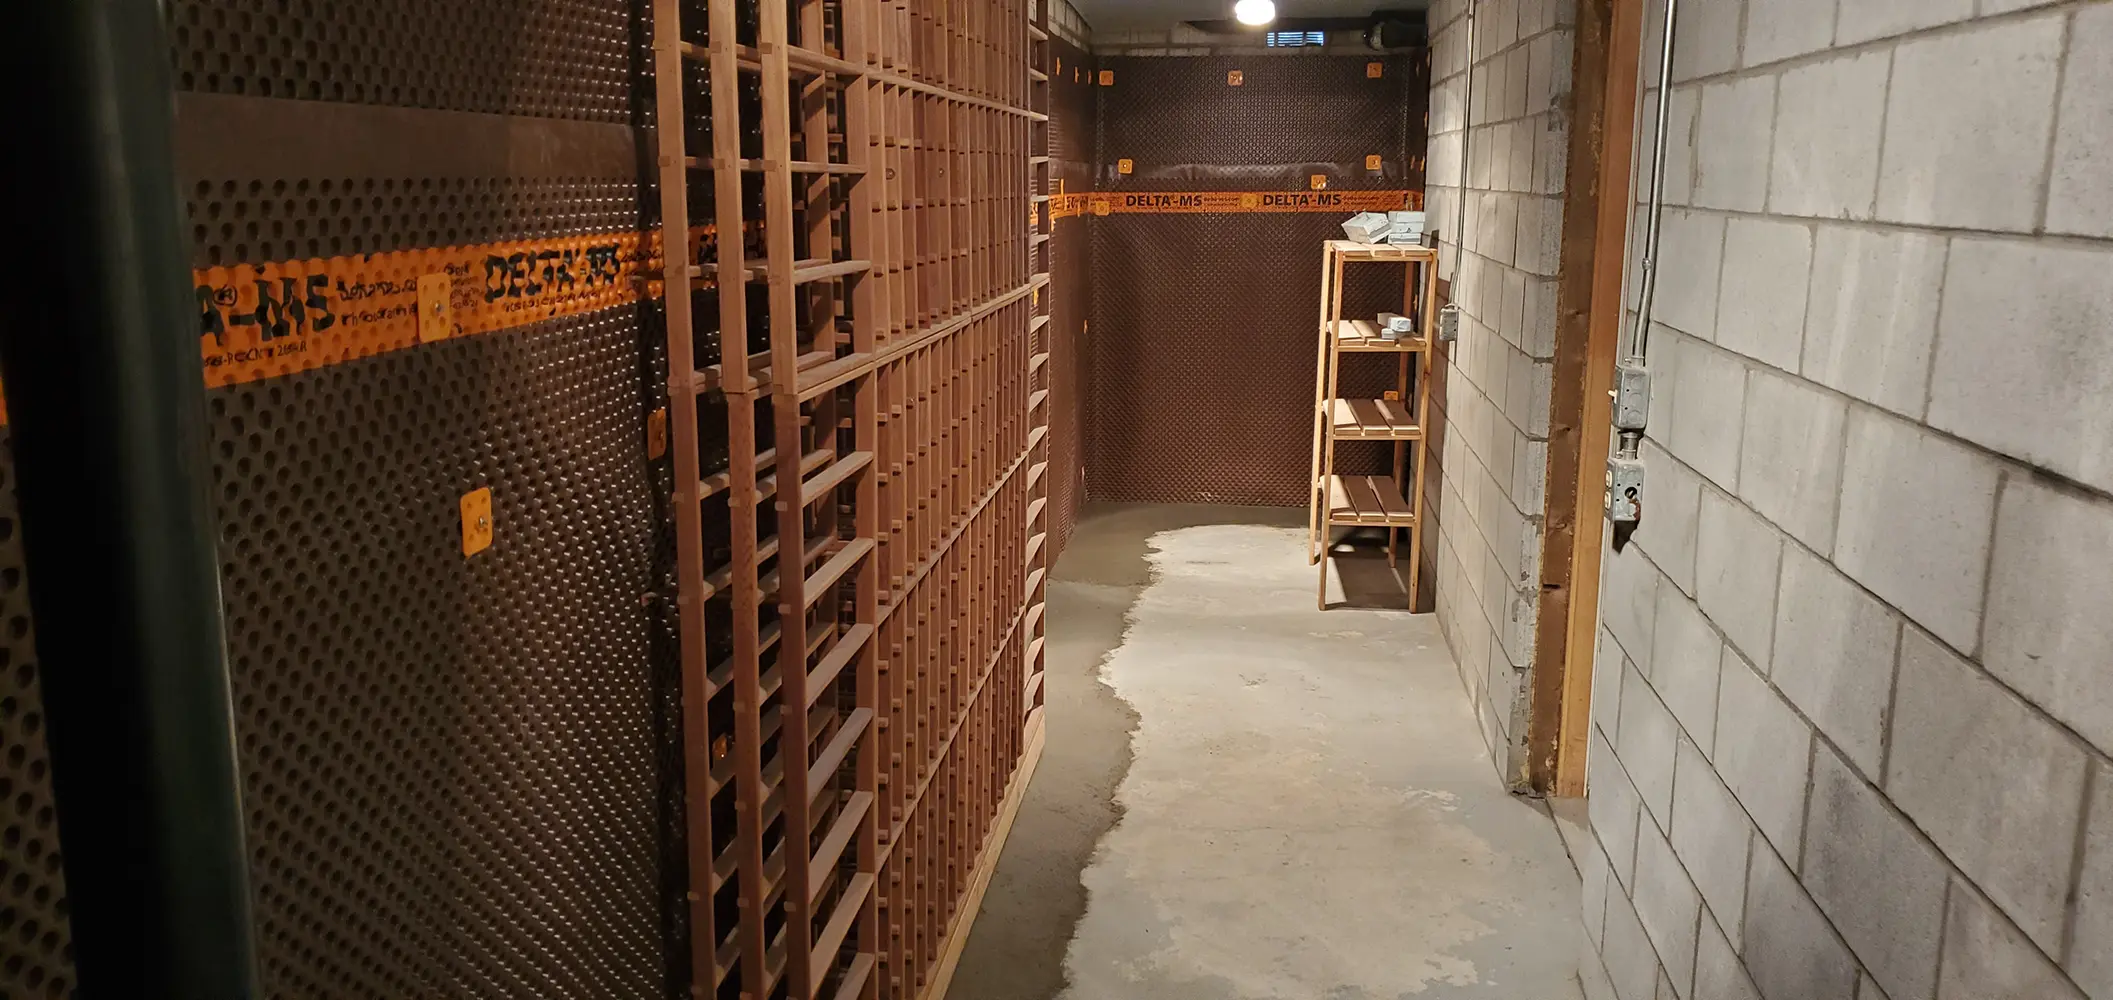 Interior view of a basement undergoing renovation with a waterproofing membrane on one wall, bare cinder blocks on the opposite wall, and a wooden shelving unit between them on a partially concreted floor.